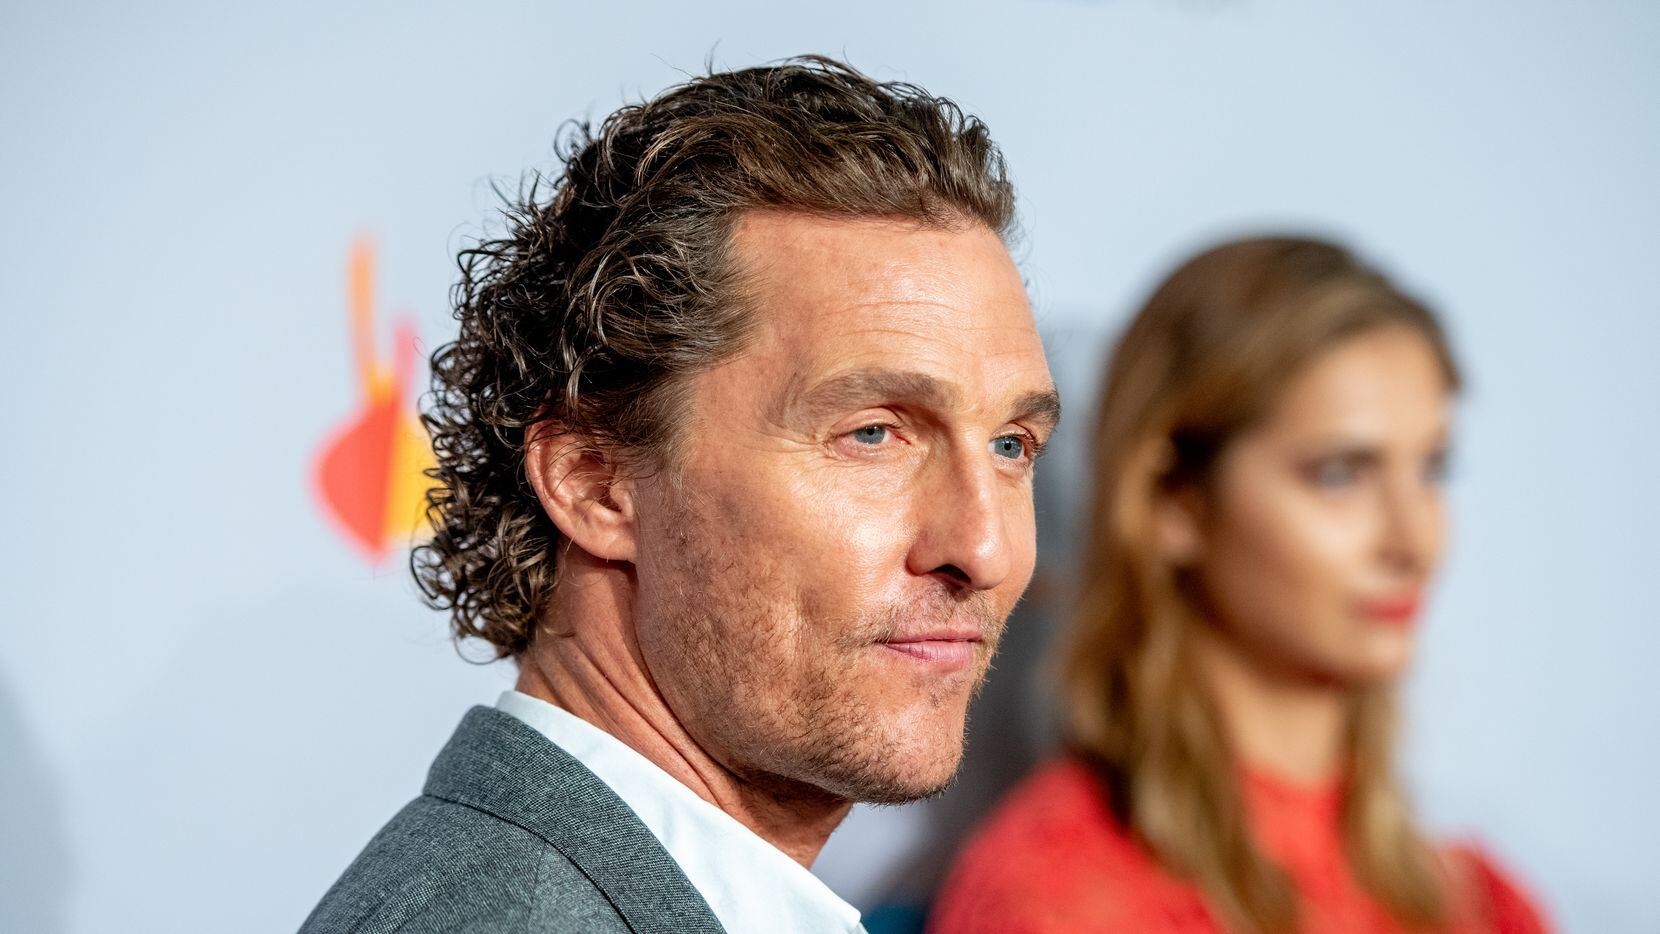 Matthew McConaughey has dropped out of "Dallas Sting," an upcoming movie based on the true...